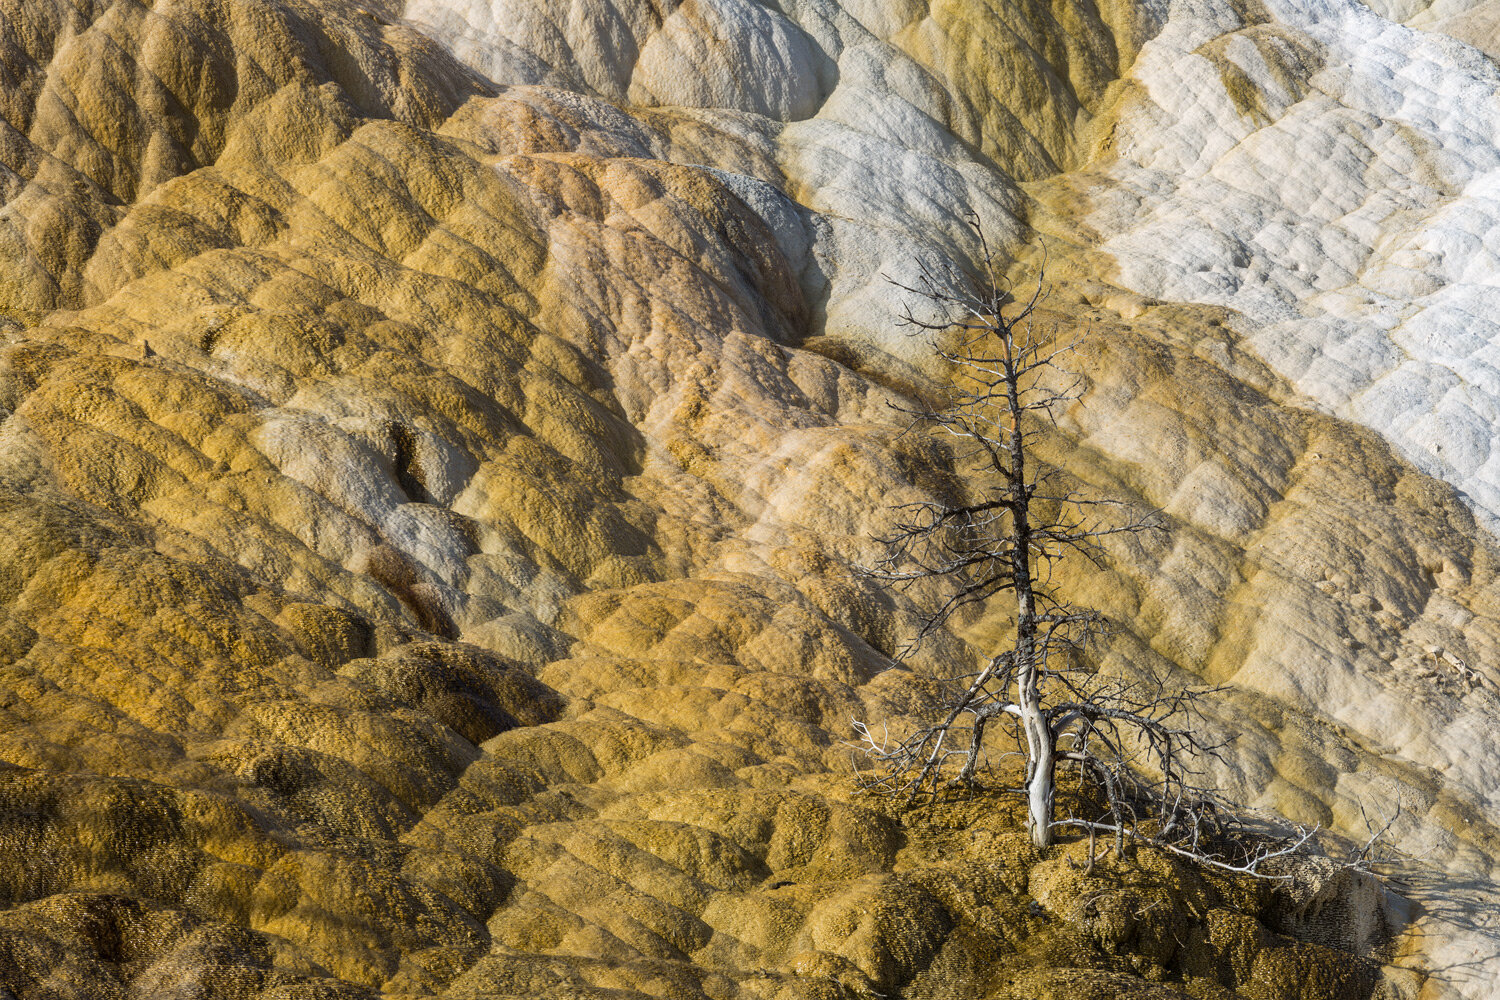 Lower Terrace, Mammoth Hot Springs. Yellowstone National Park, WY. 2015